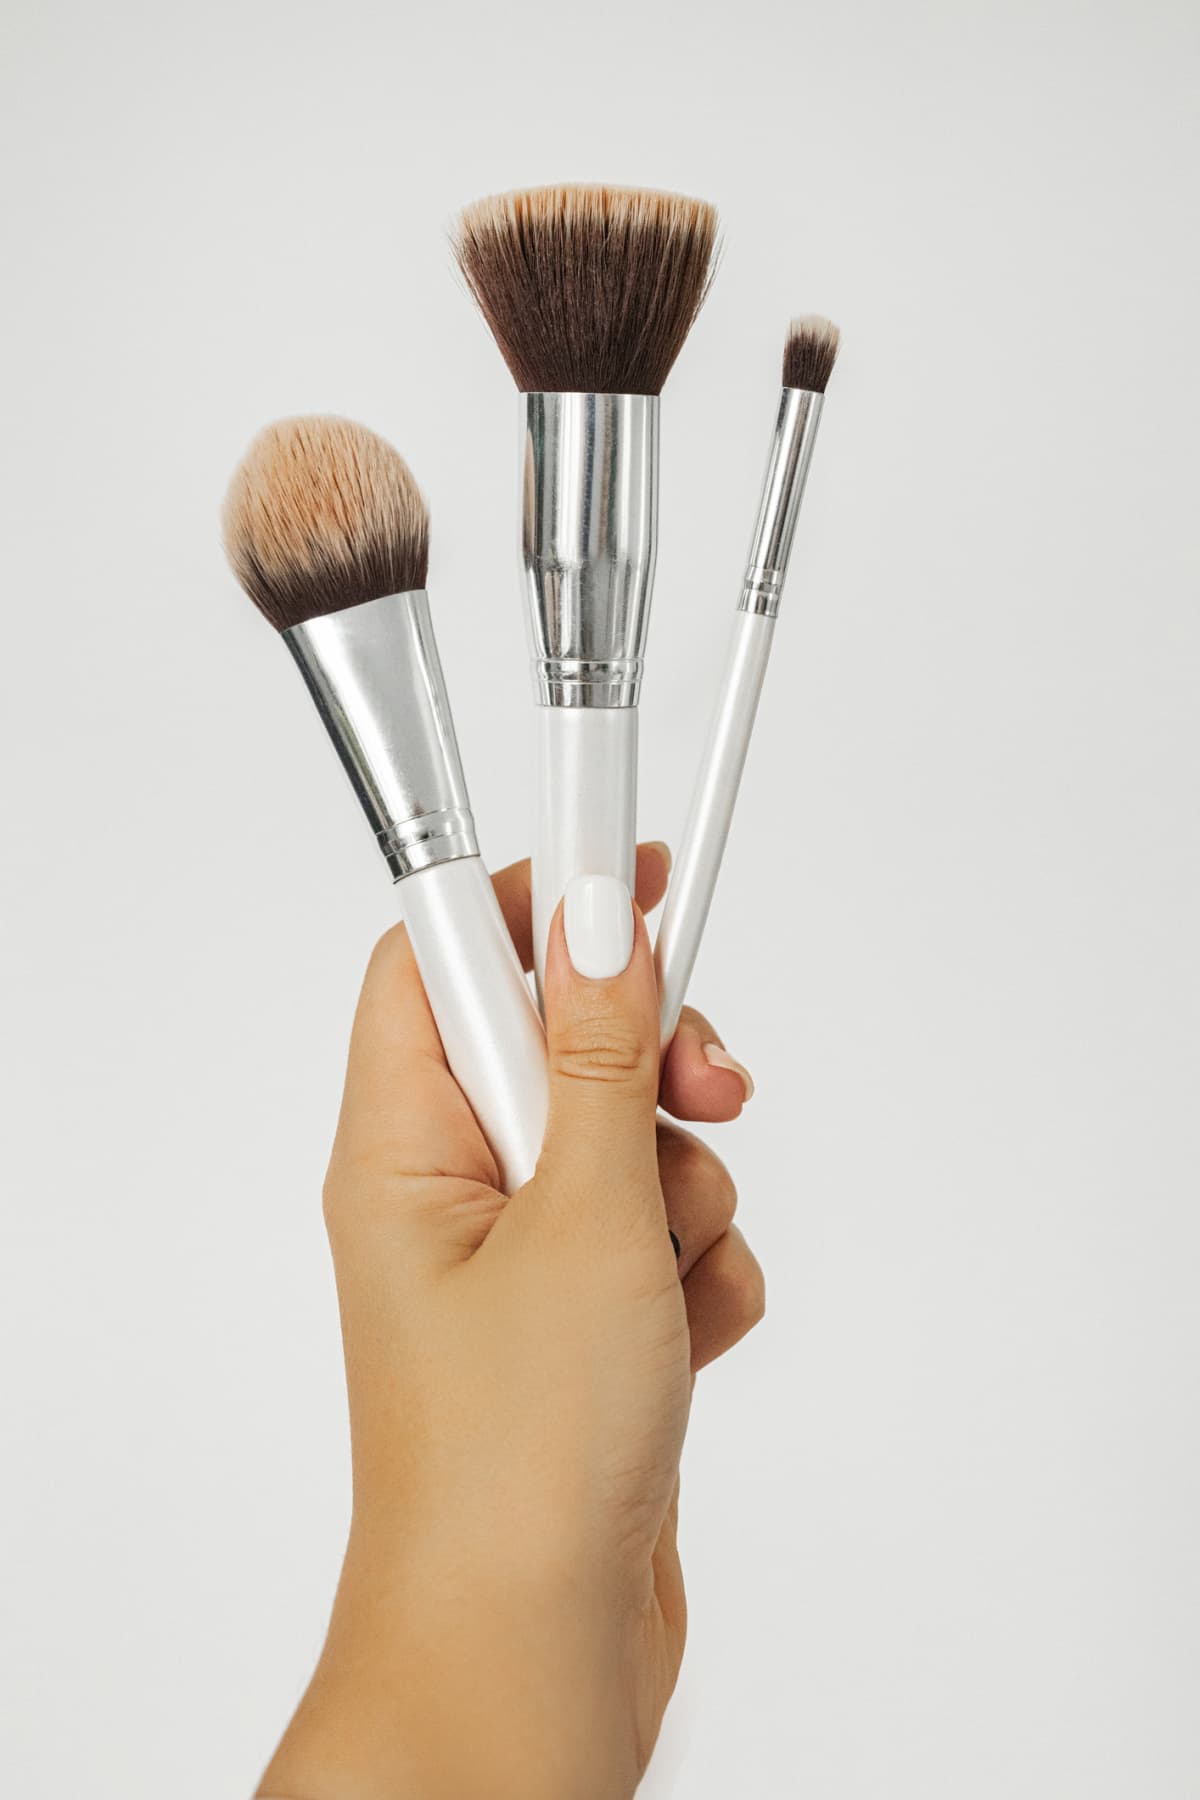 makeup brushes in hand isolated on white background, make-up artist, make-up tools, hand holding brushes